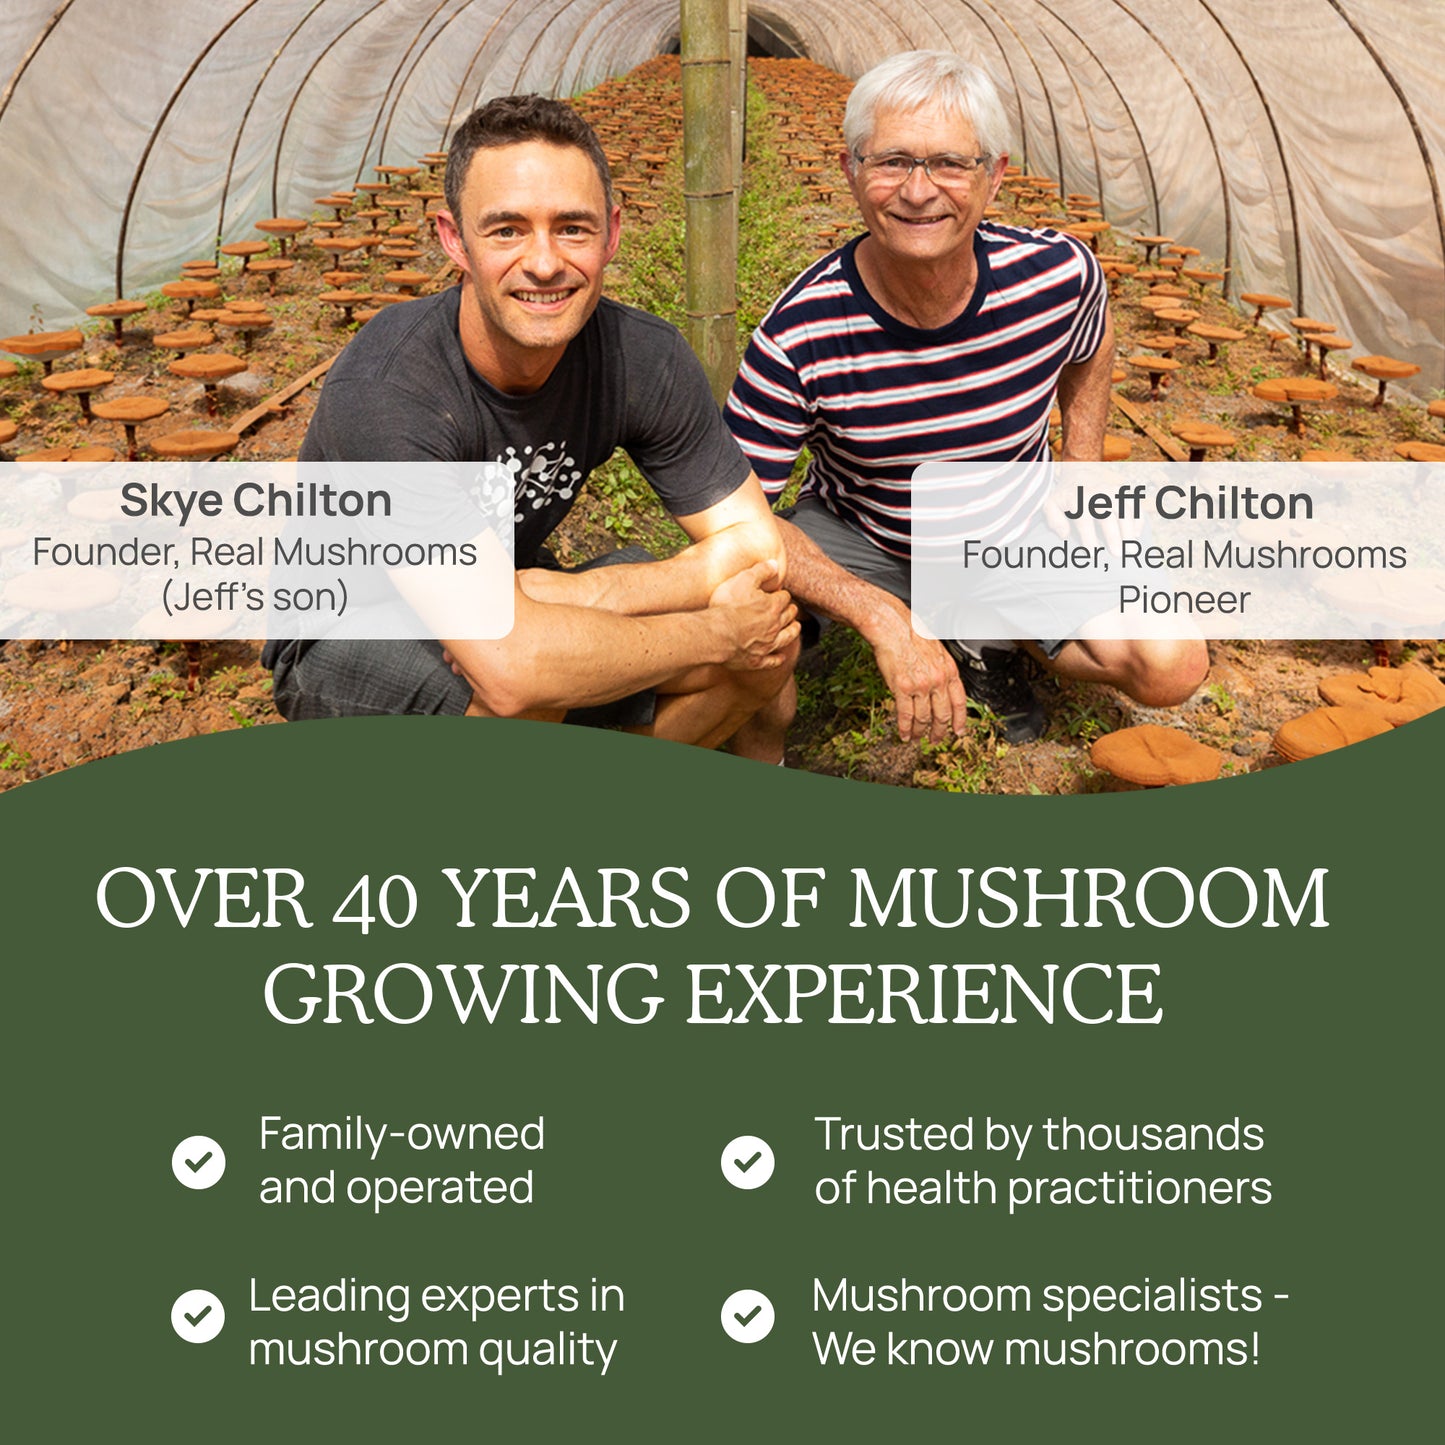 Two men smiling in an organic mushroom growing facility, with text highlighting their expertise and experience in the field of Real Mushrooms' Turkey Tail Mushroom Capsules cultivation.